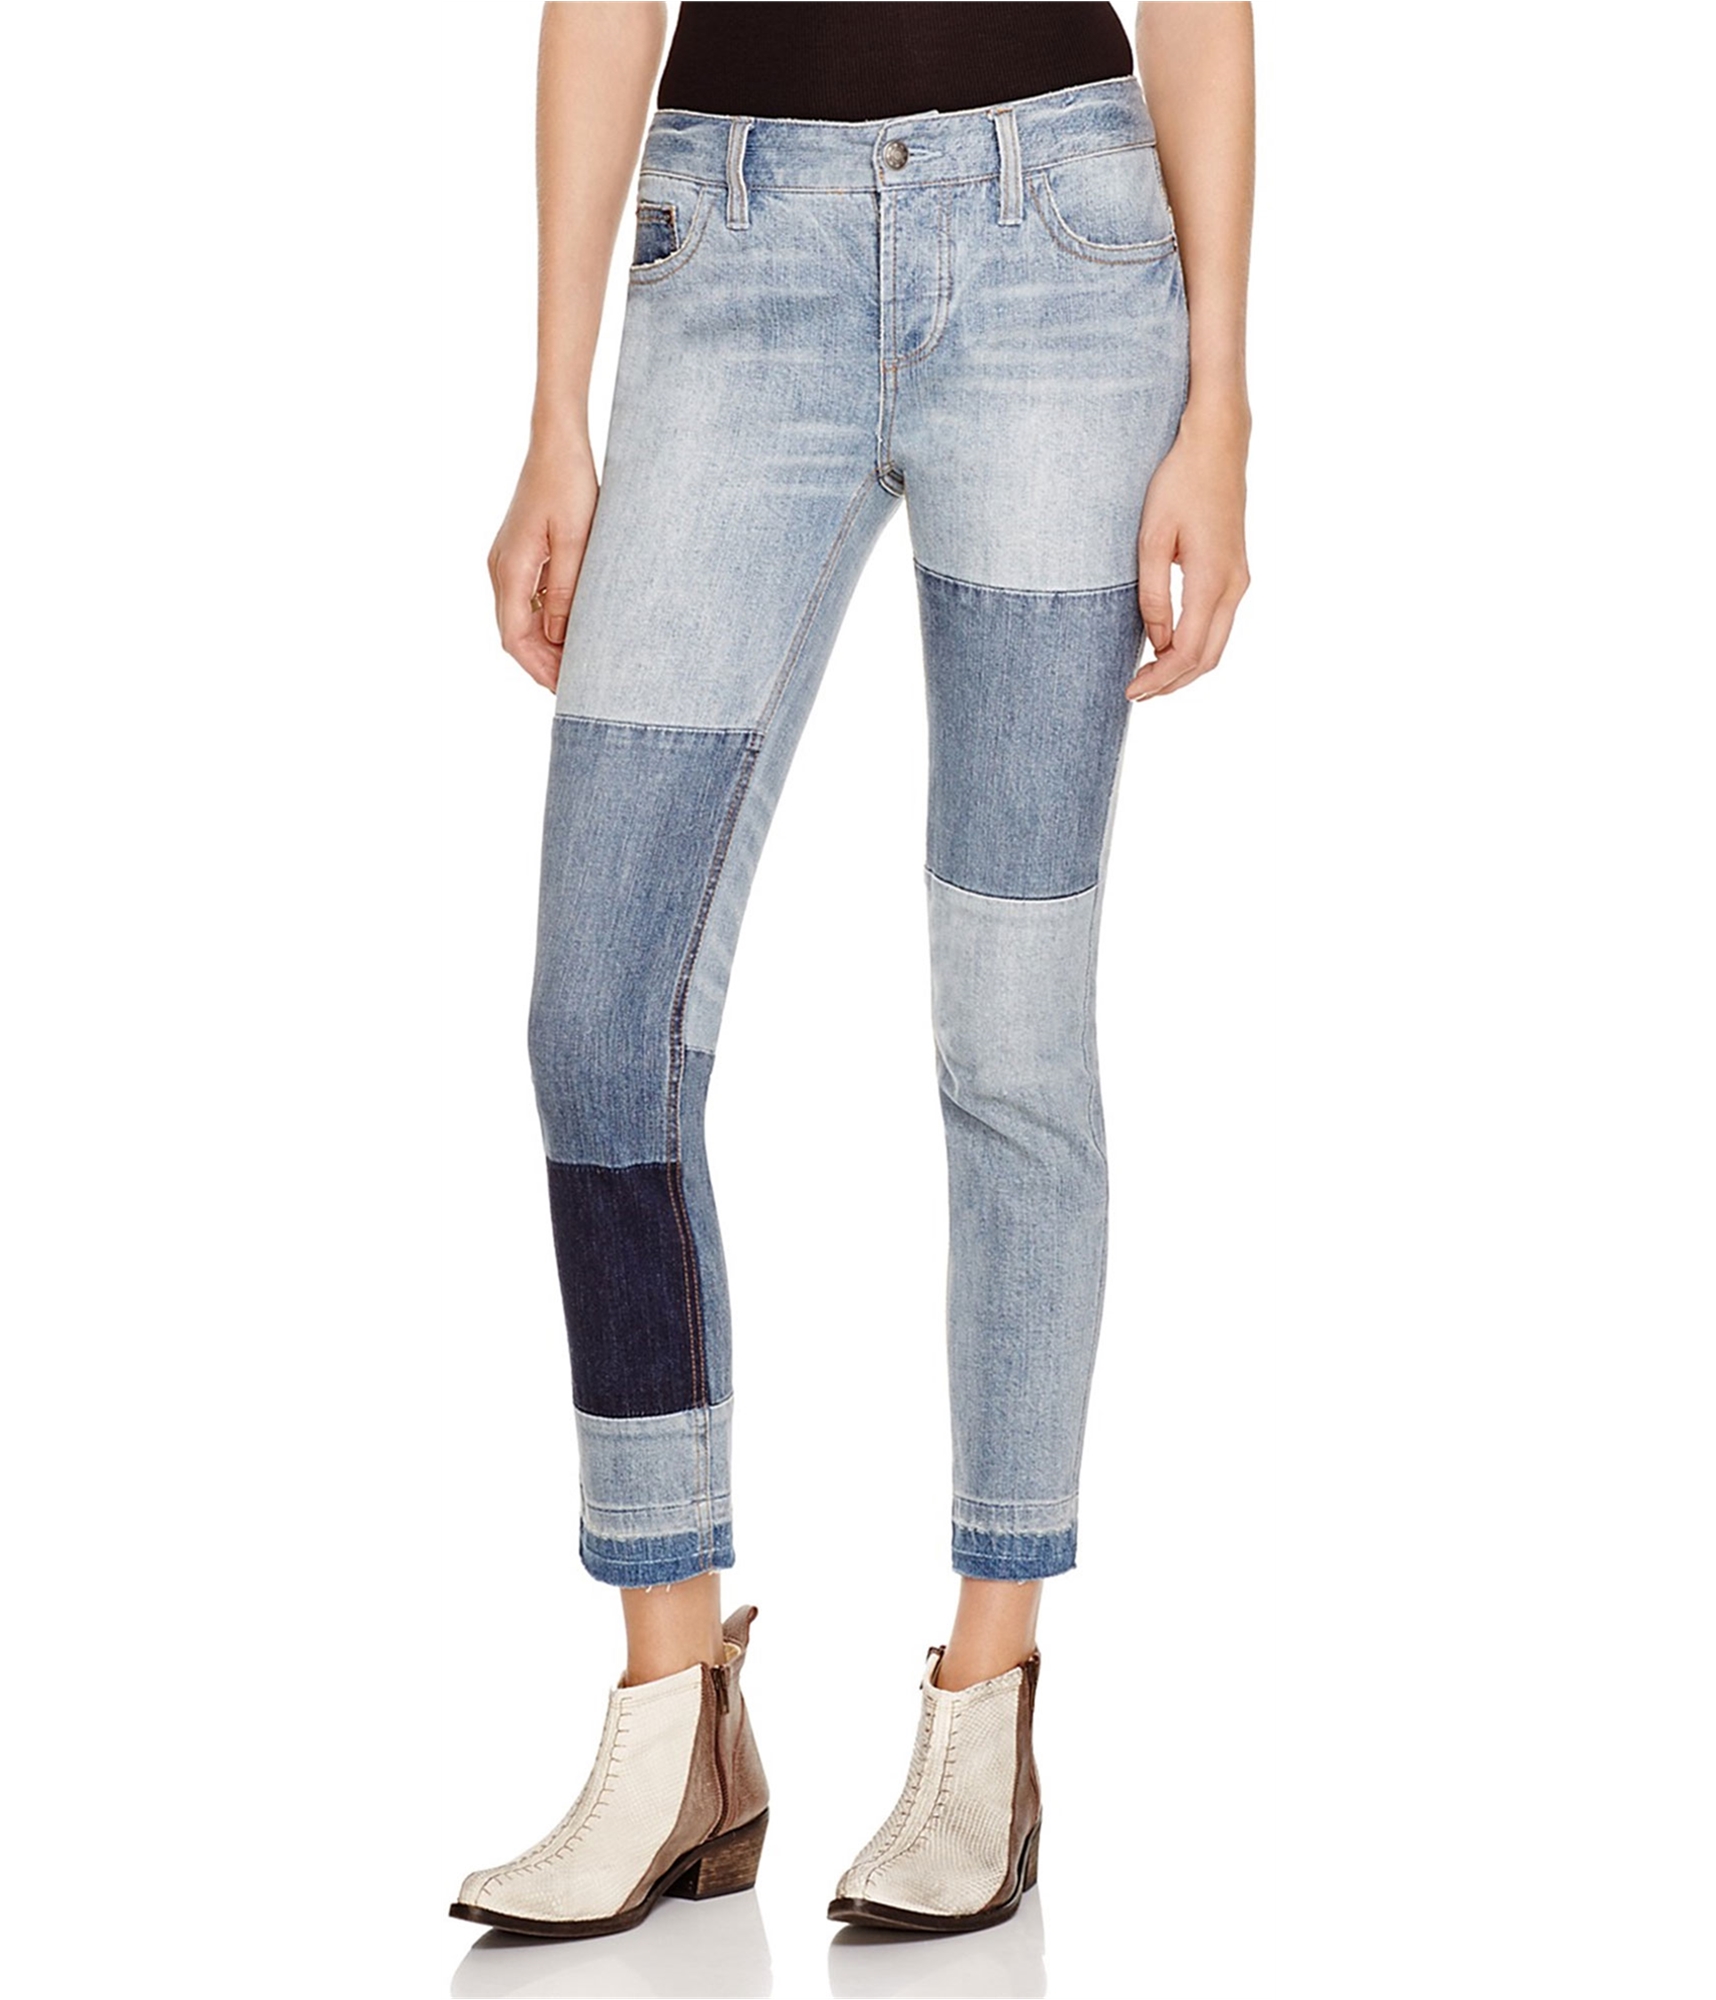 woman-wearing-patched-jeans